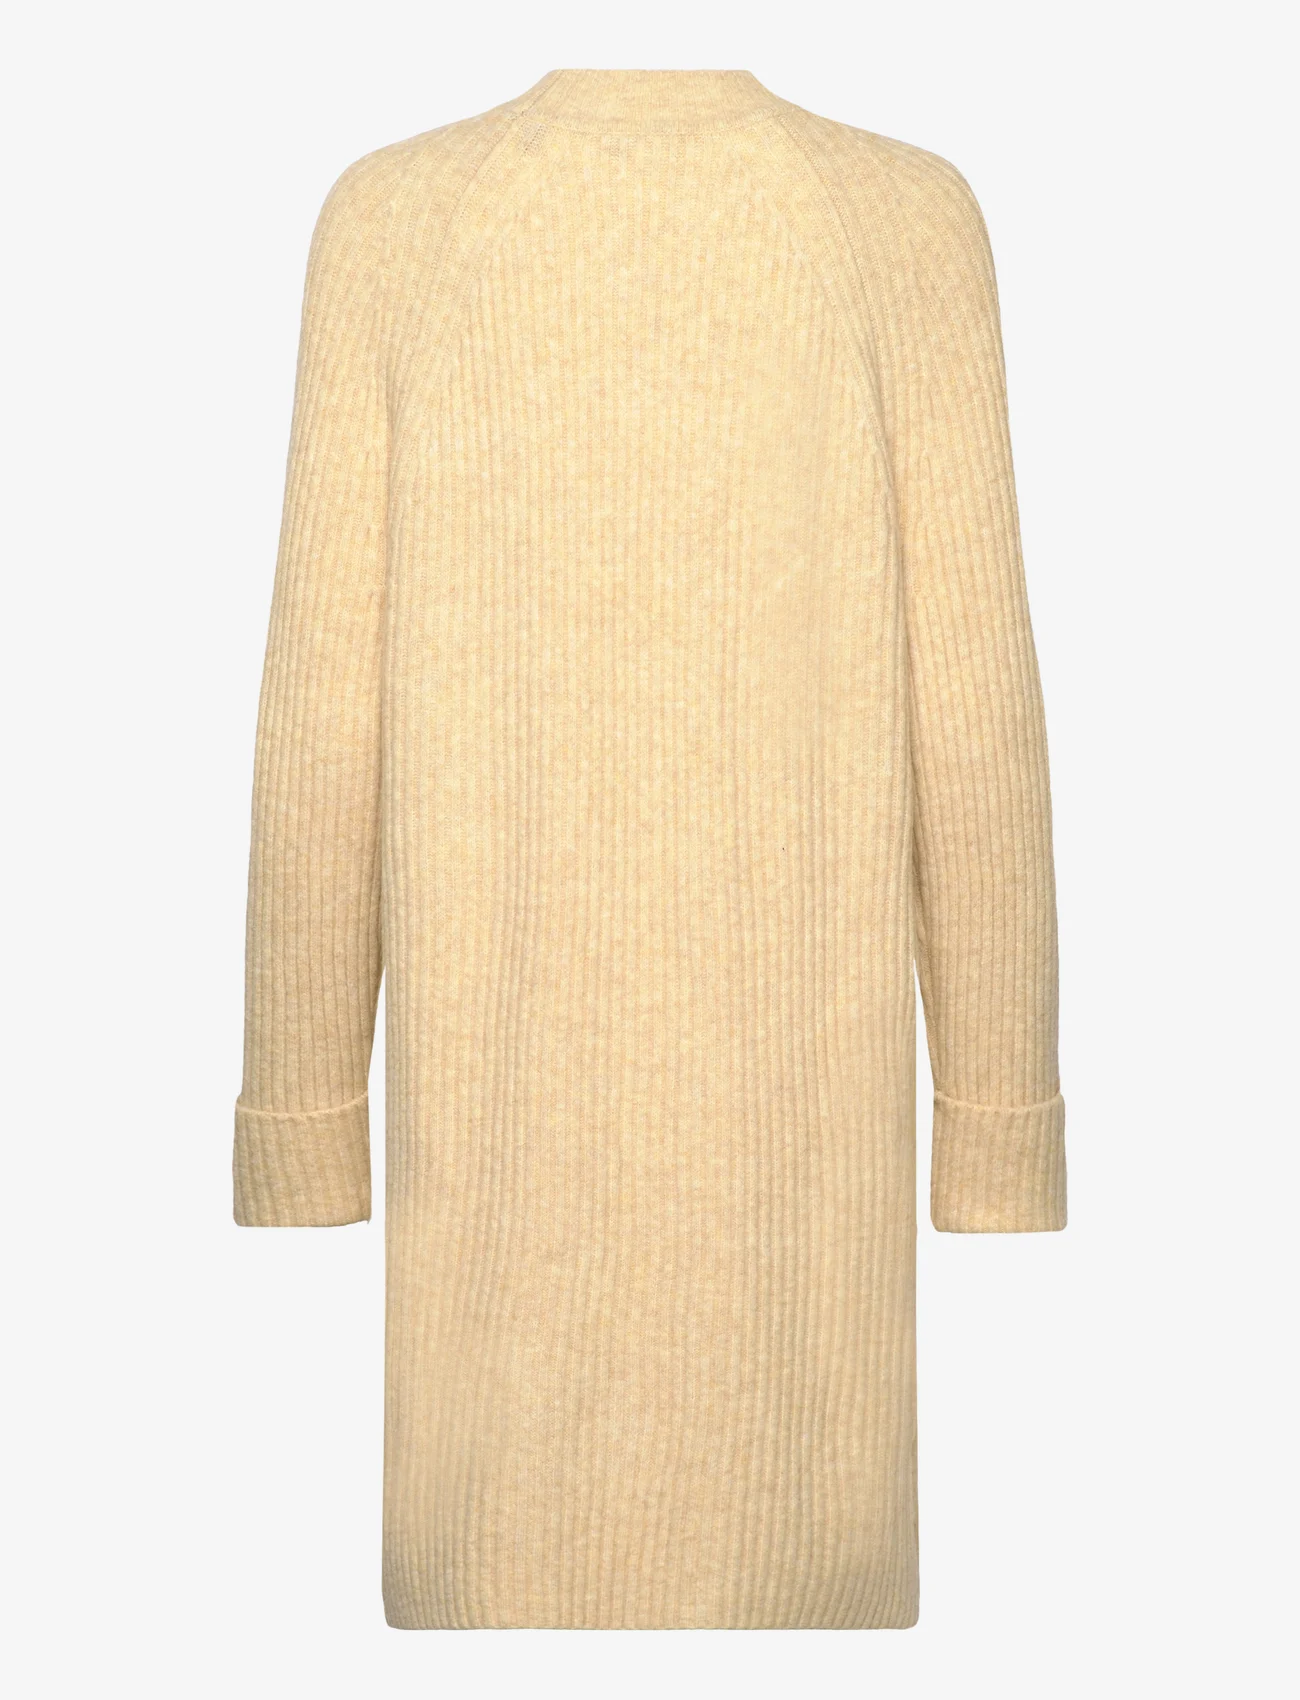 Esprit Casual - Dresses flat knitted - knitted dresses - light beige 2 - 1